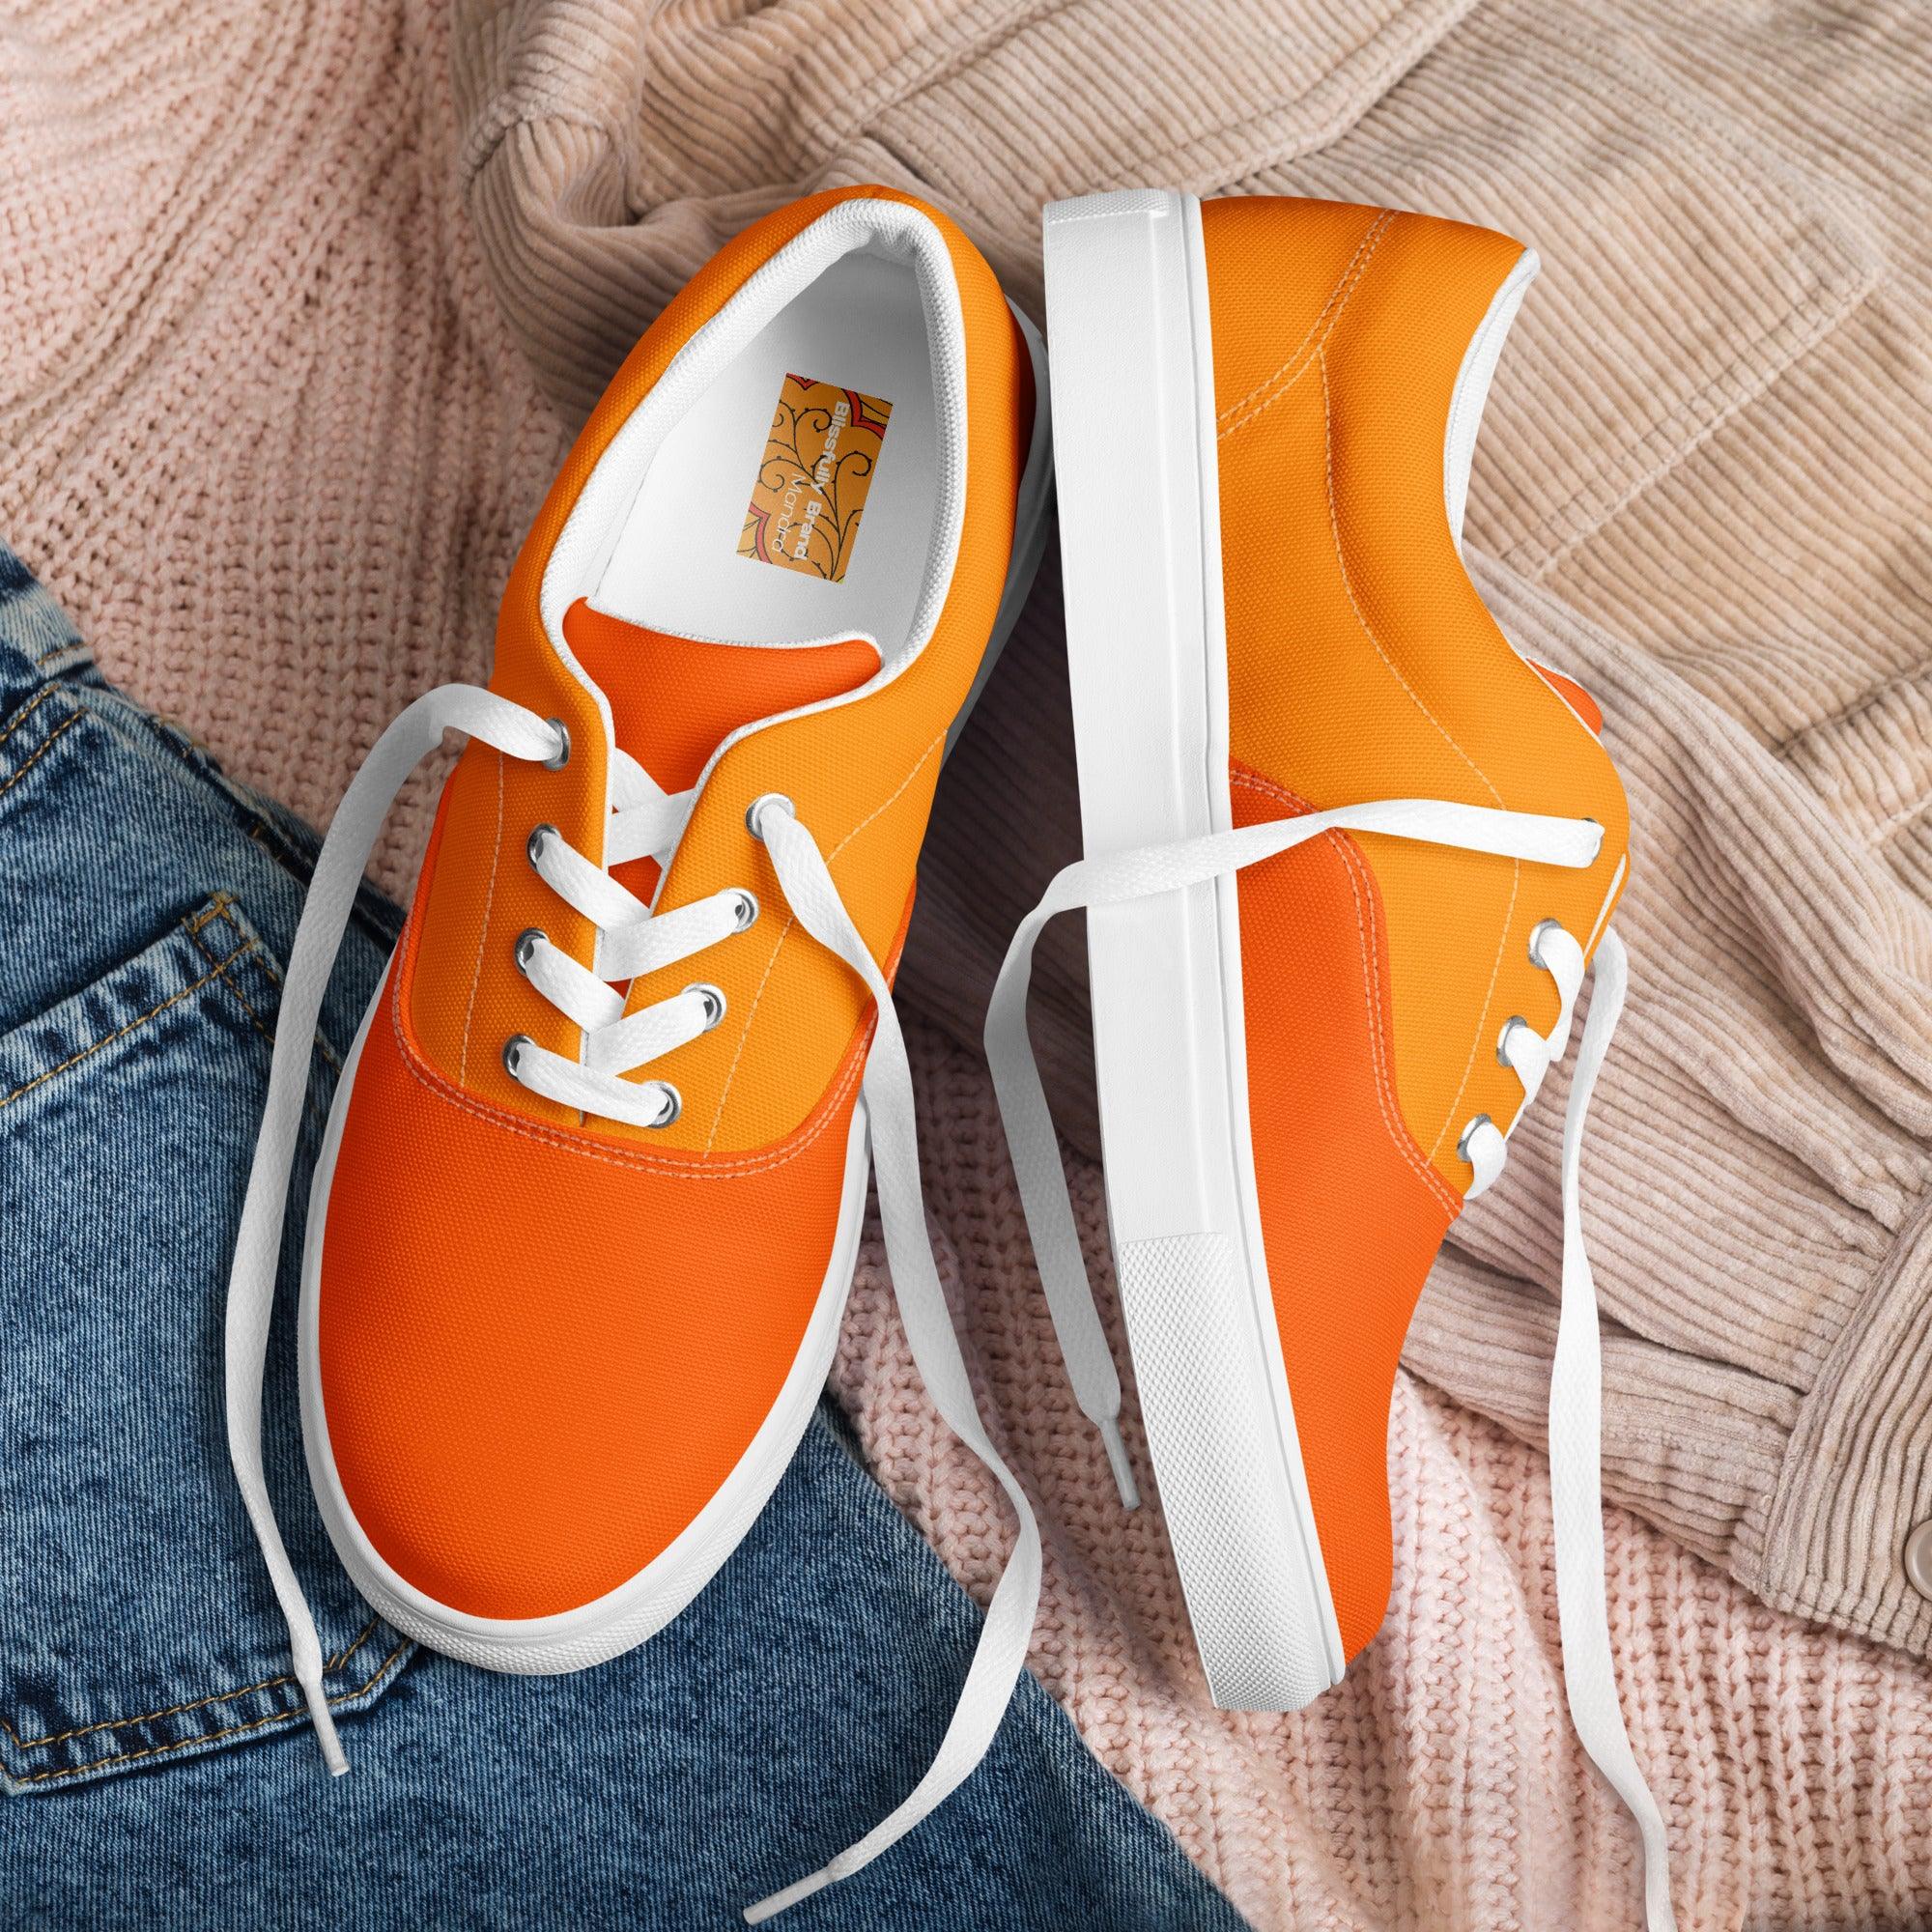 Mandra Orange Color Block Lace Up Canvas Sneakers Two Tone Vibrant Bold Bright Breathable Solid Gym Workout Yoga Sports Casual Women's 